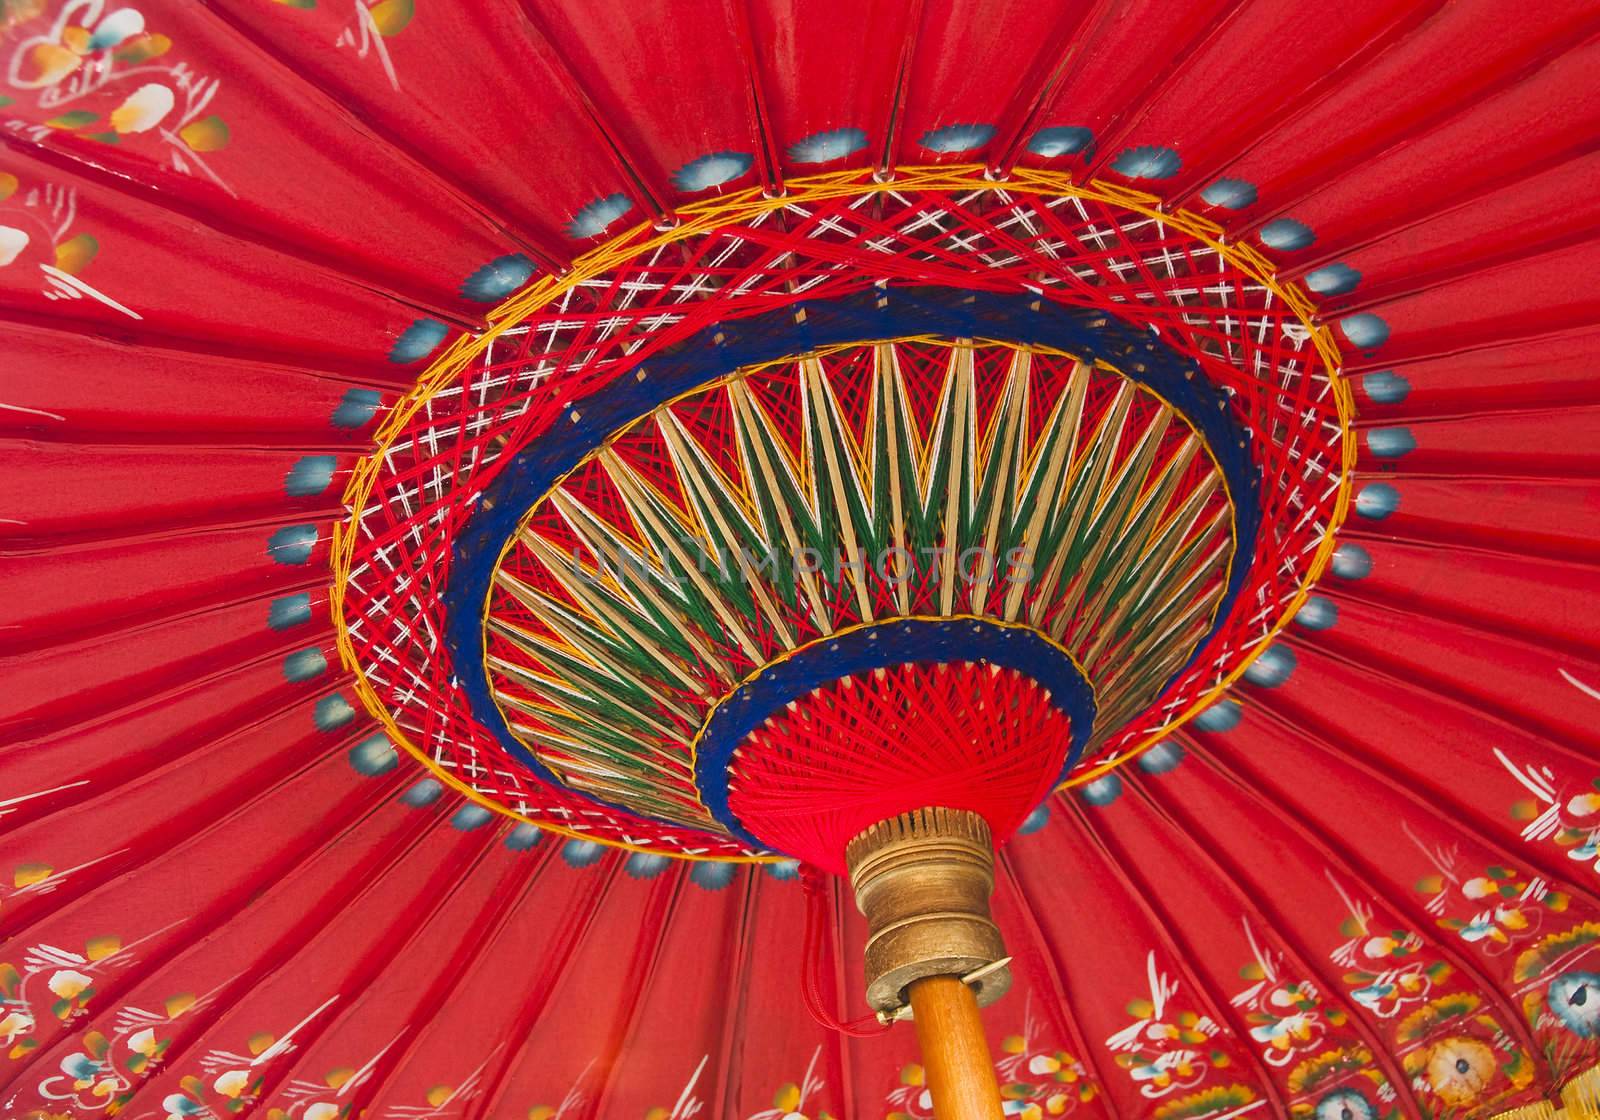 A traditional red Asian umbrella